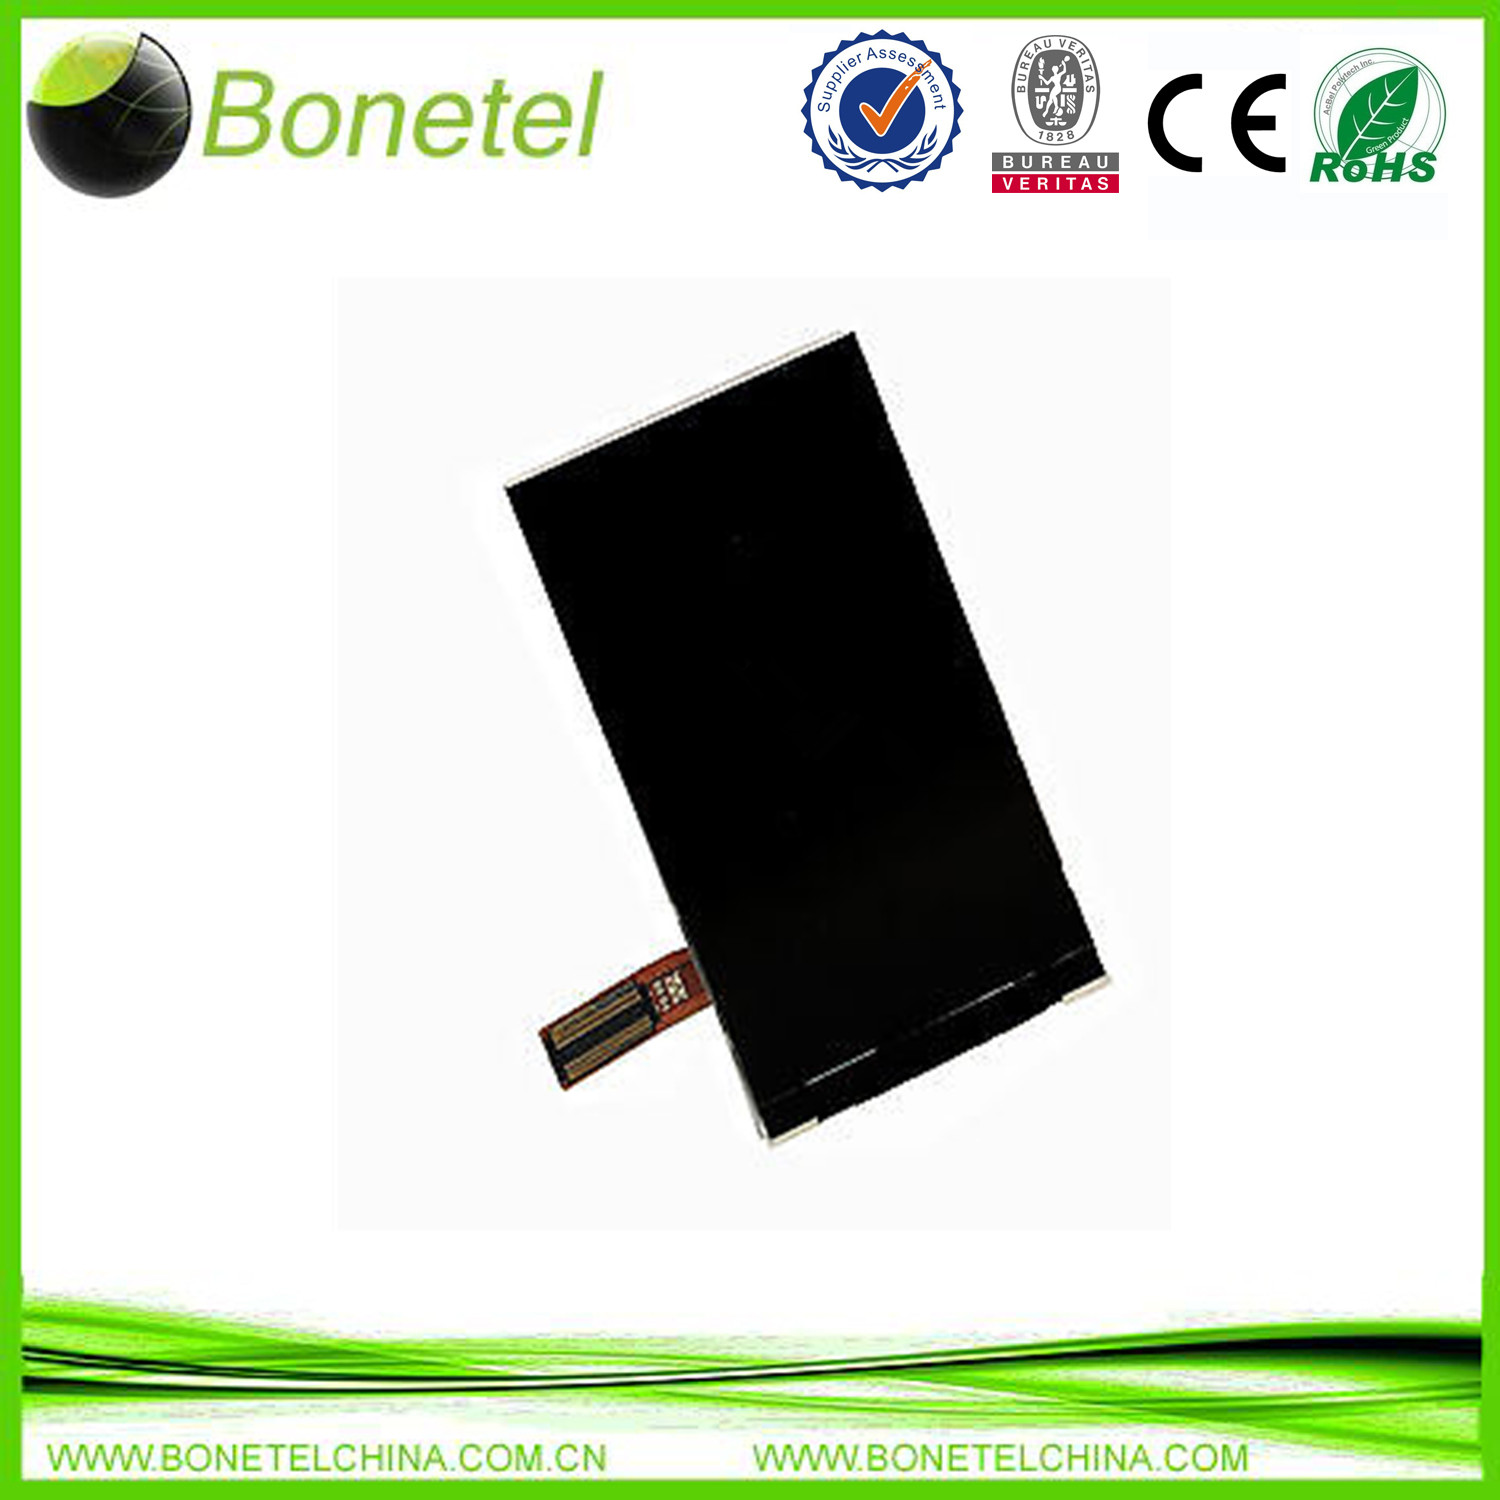 NEW LCD DiSPLAY GLASS SCREEN MONiTOR REPLACEMENT FOR SAMSUNG S5620